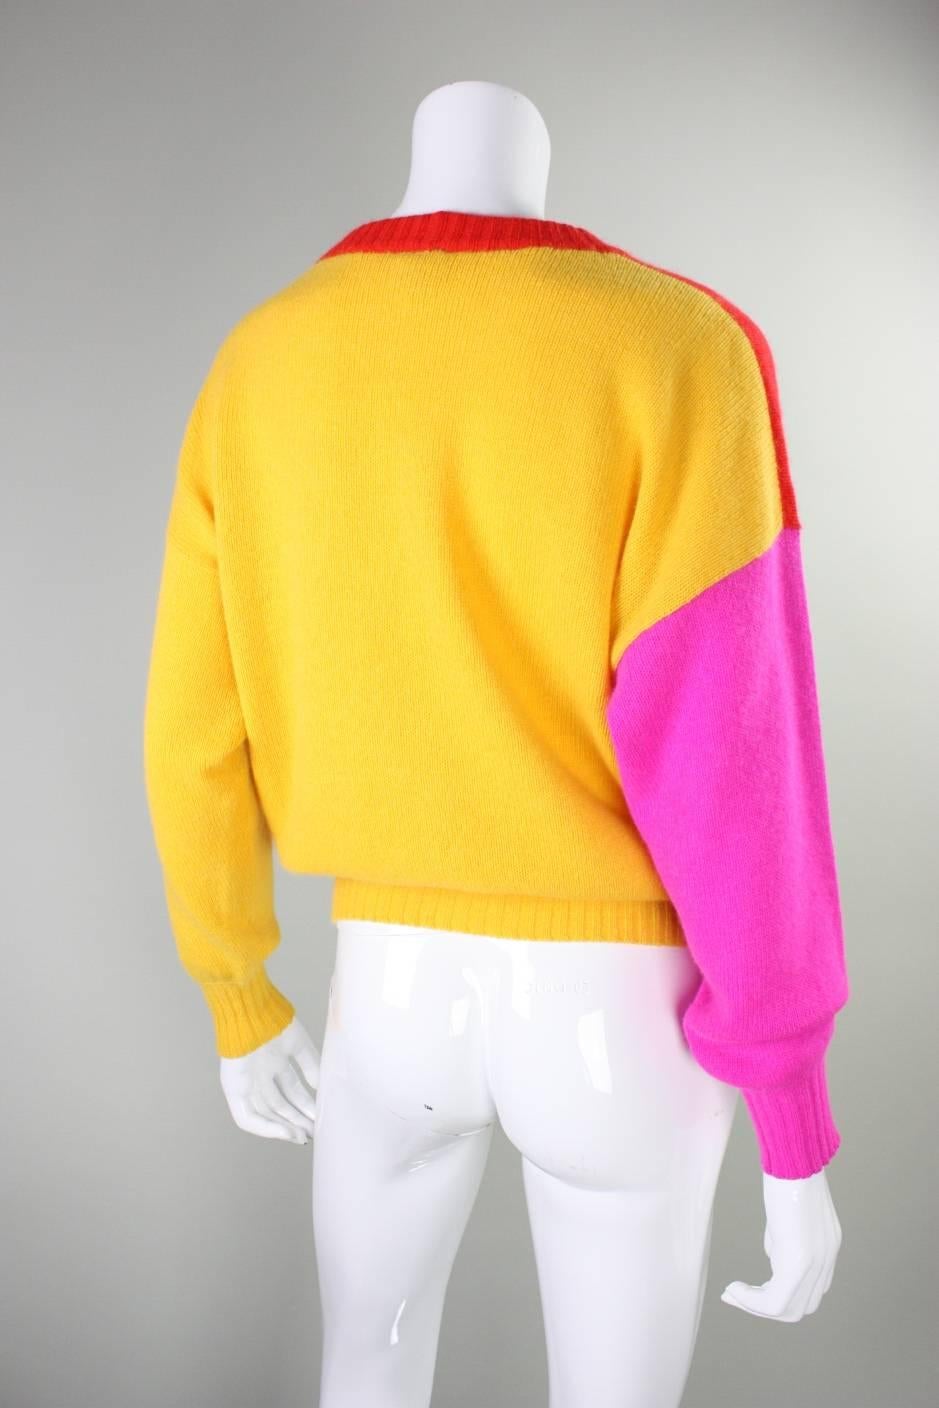 1980's Krizia Figural Sweater In Excellent Condition For Sale In Los Angeles, CA